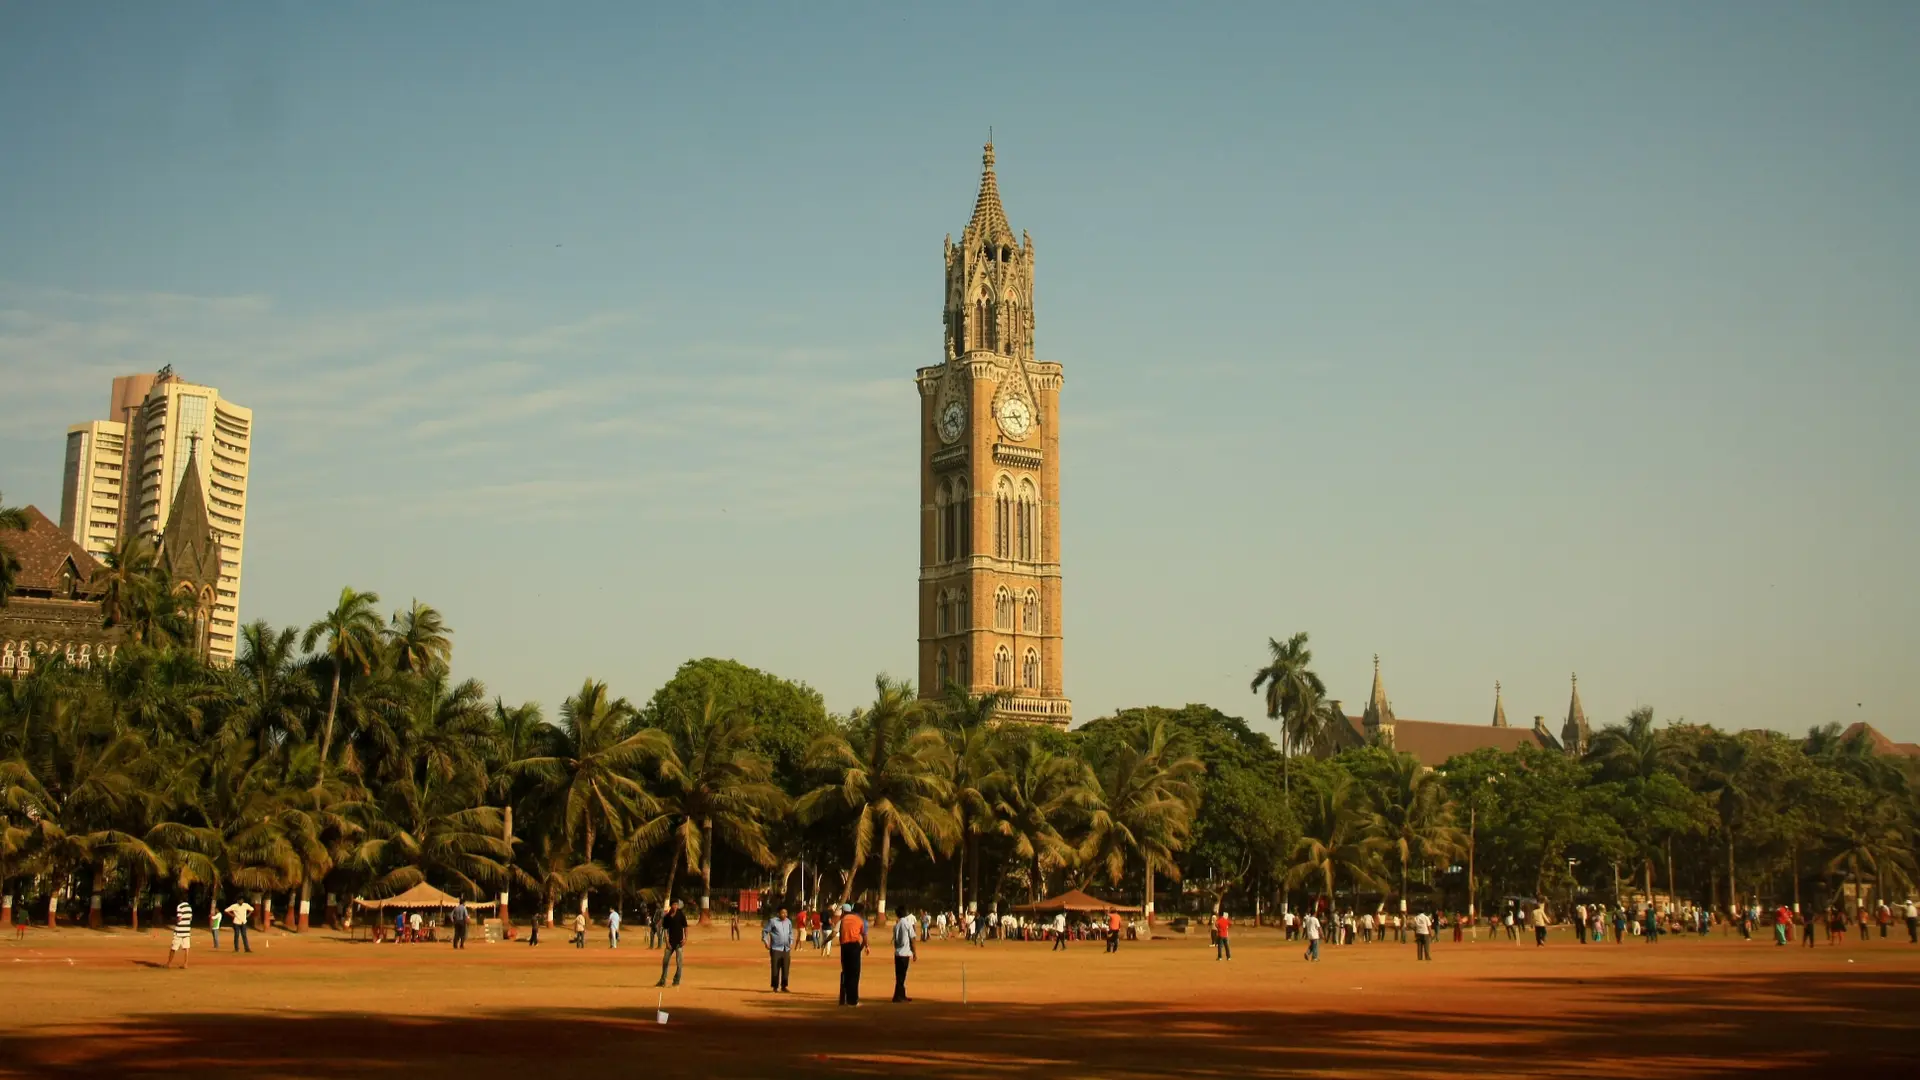 People on a sandy field behind trees and view of Rahq Bhai Tower a tall brick clocktower.